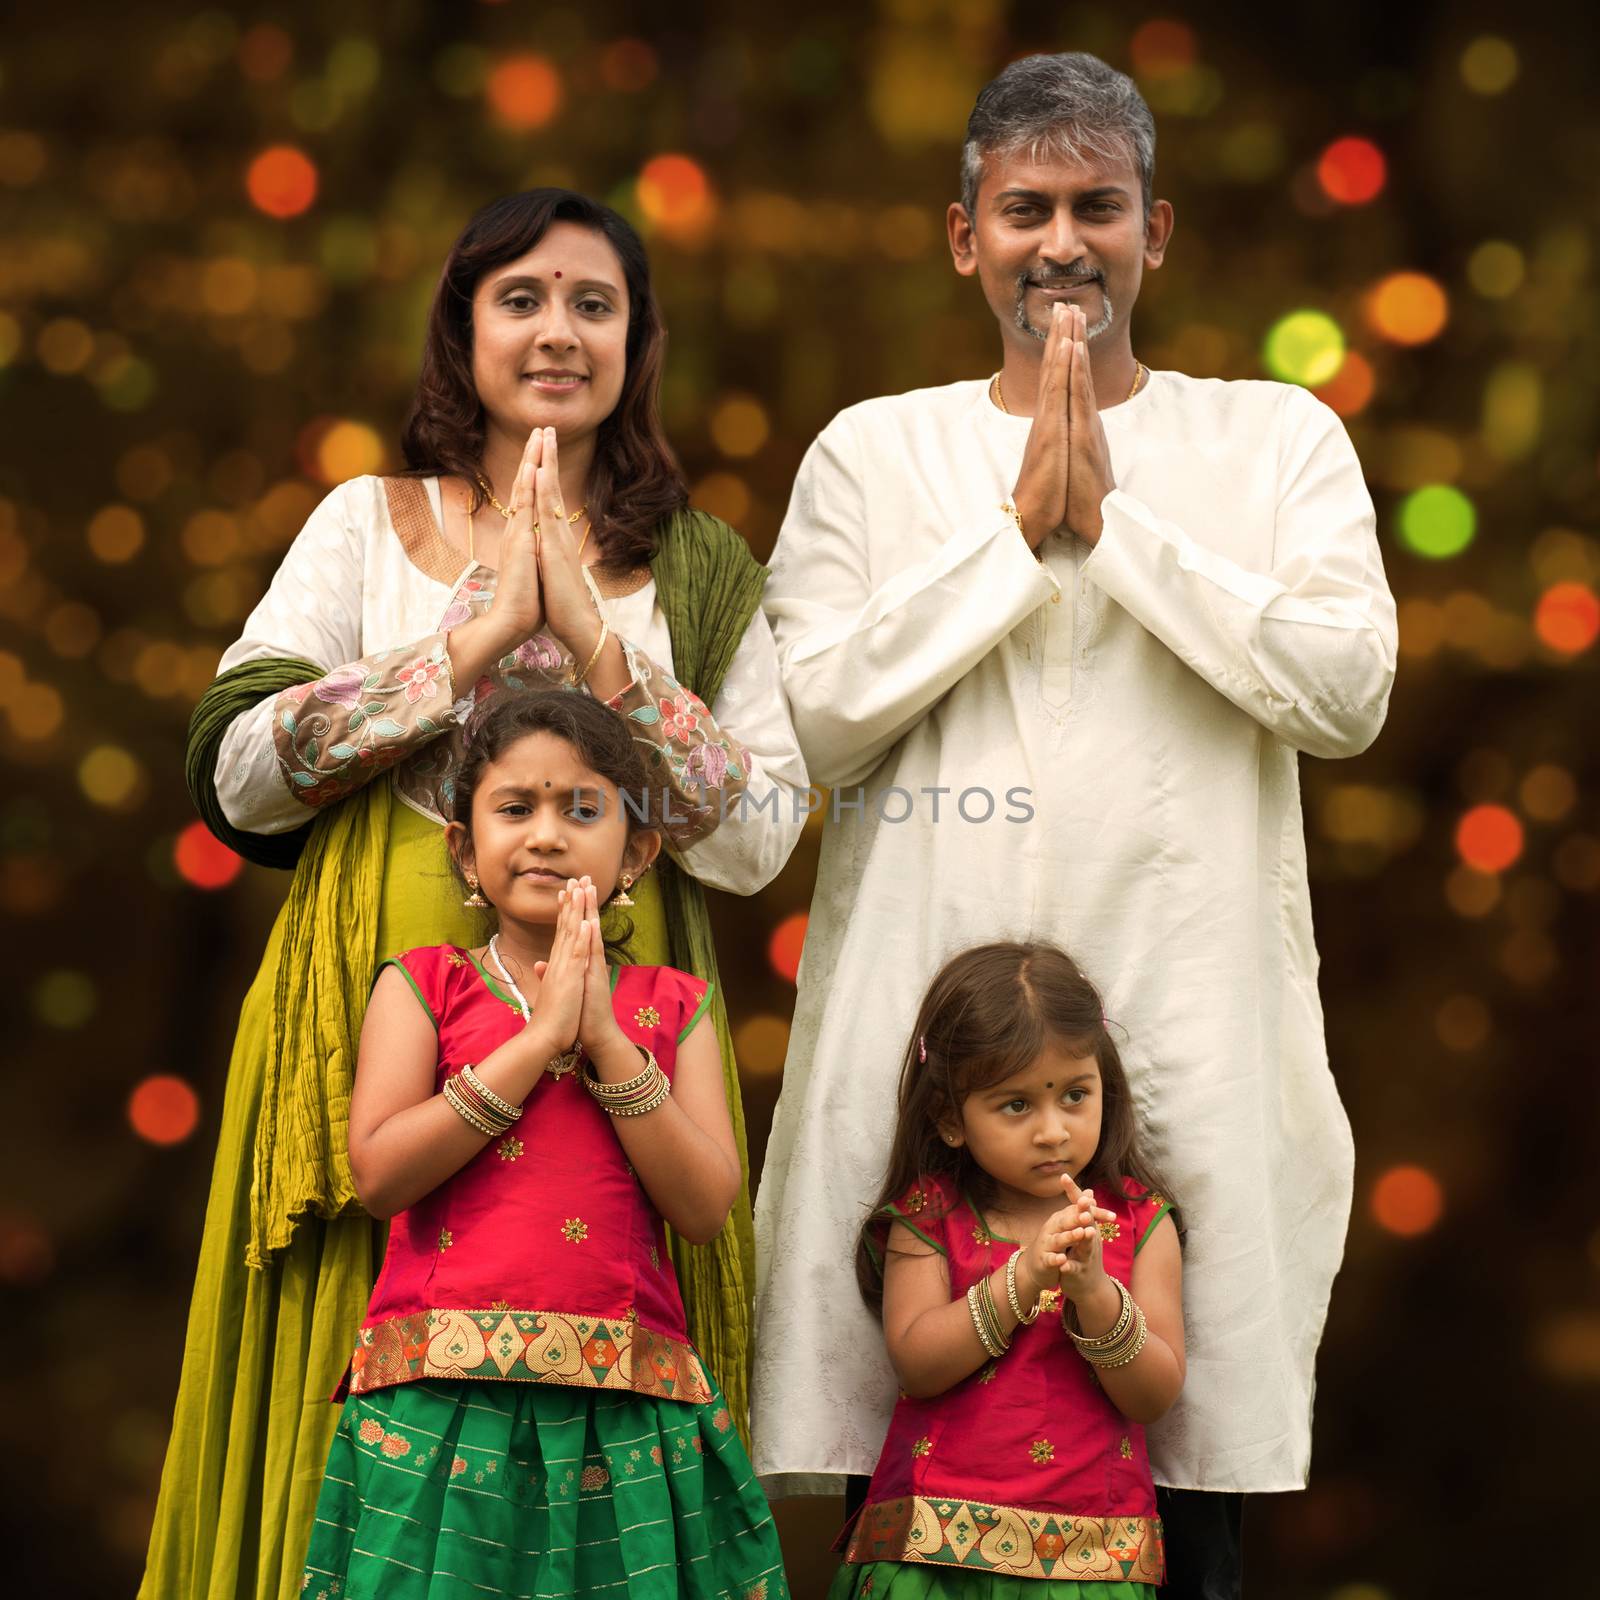 Indian family greeting on Diwali, festival of lights, inside a temple.